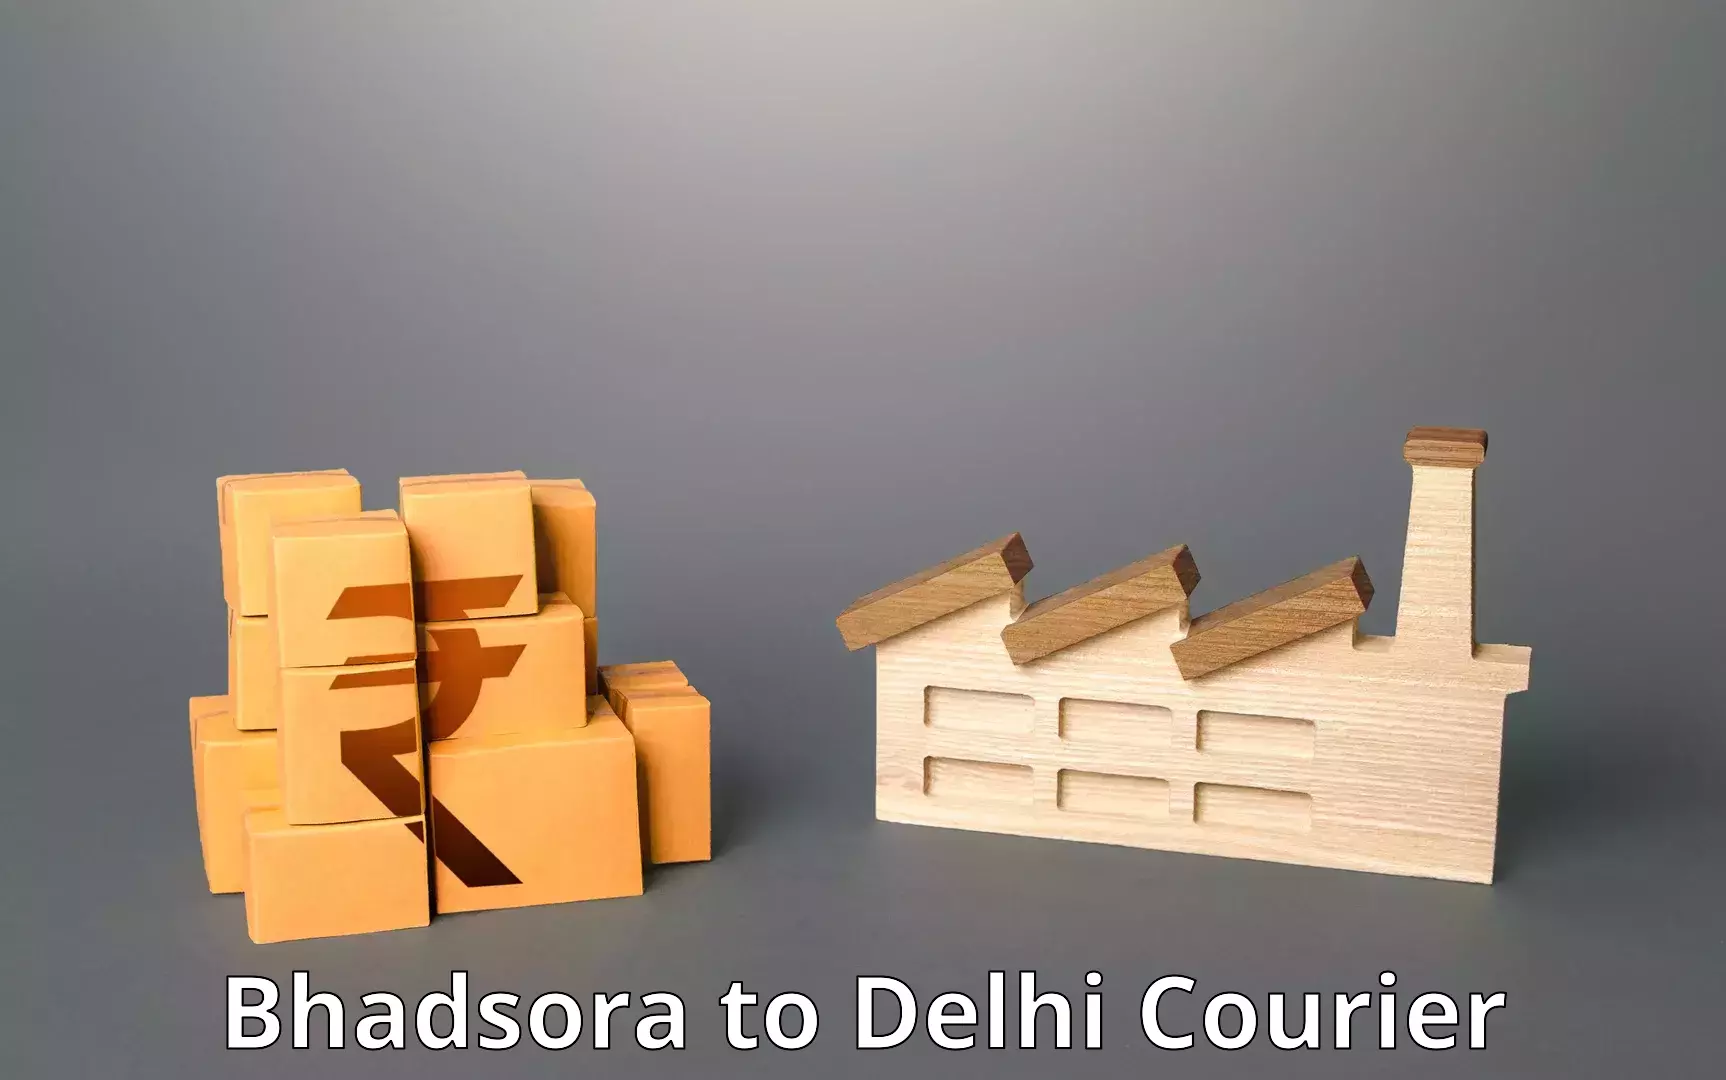 Express delivery network Bhadsora to University of Delhi